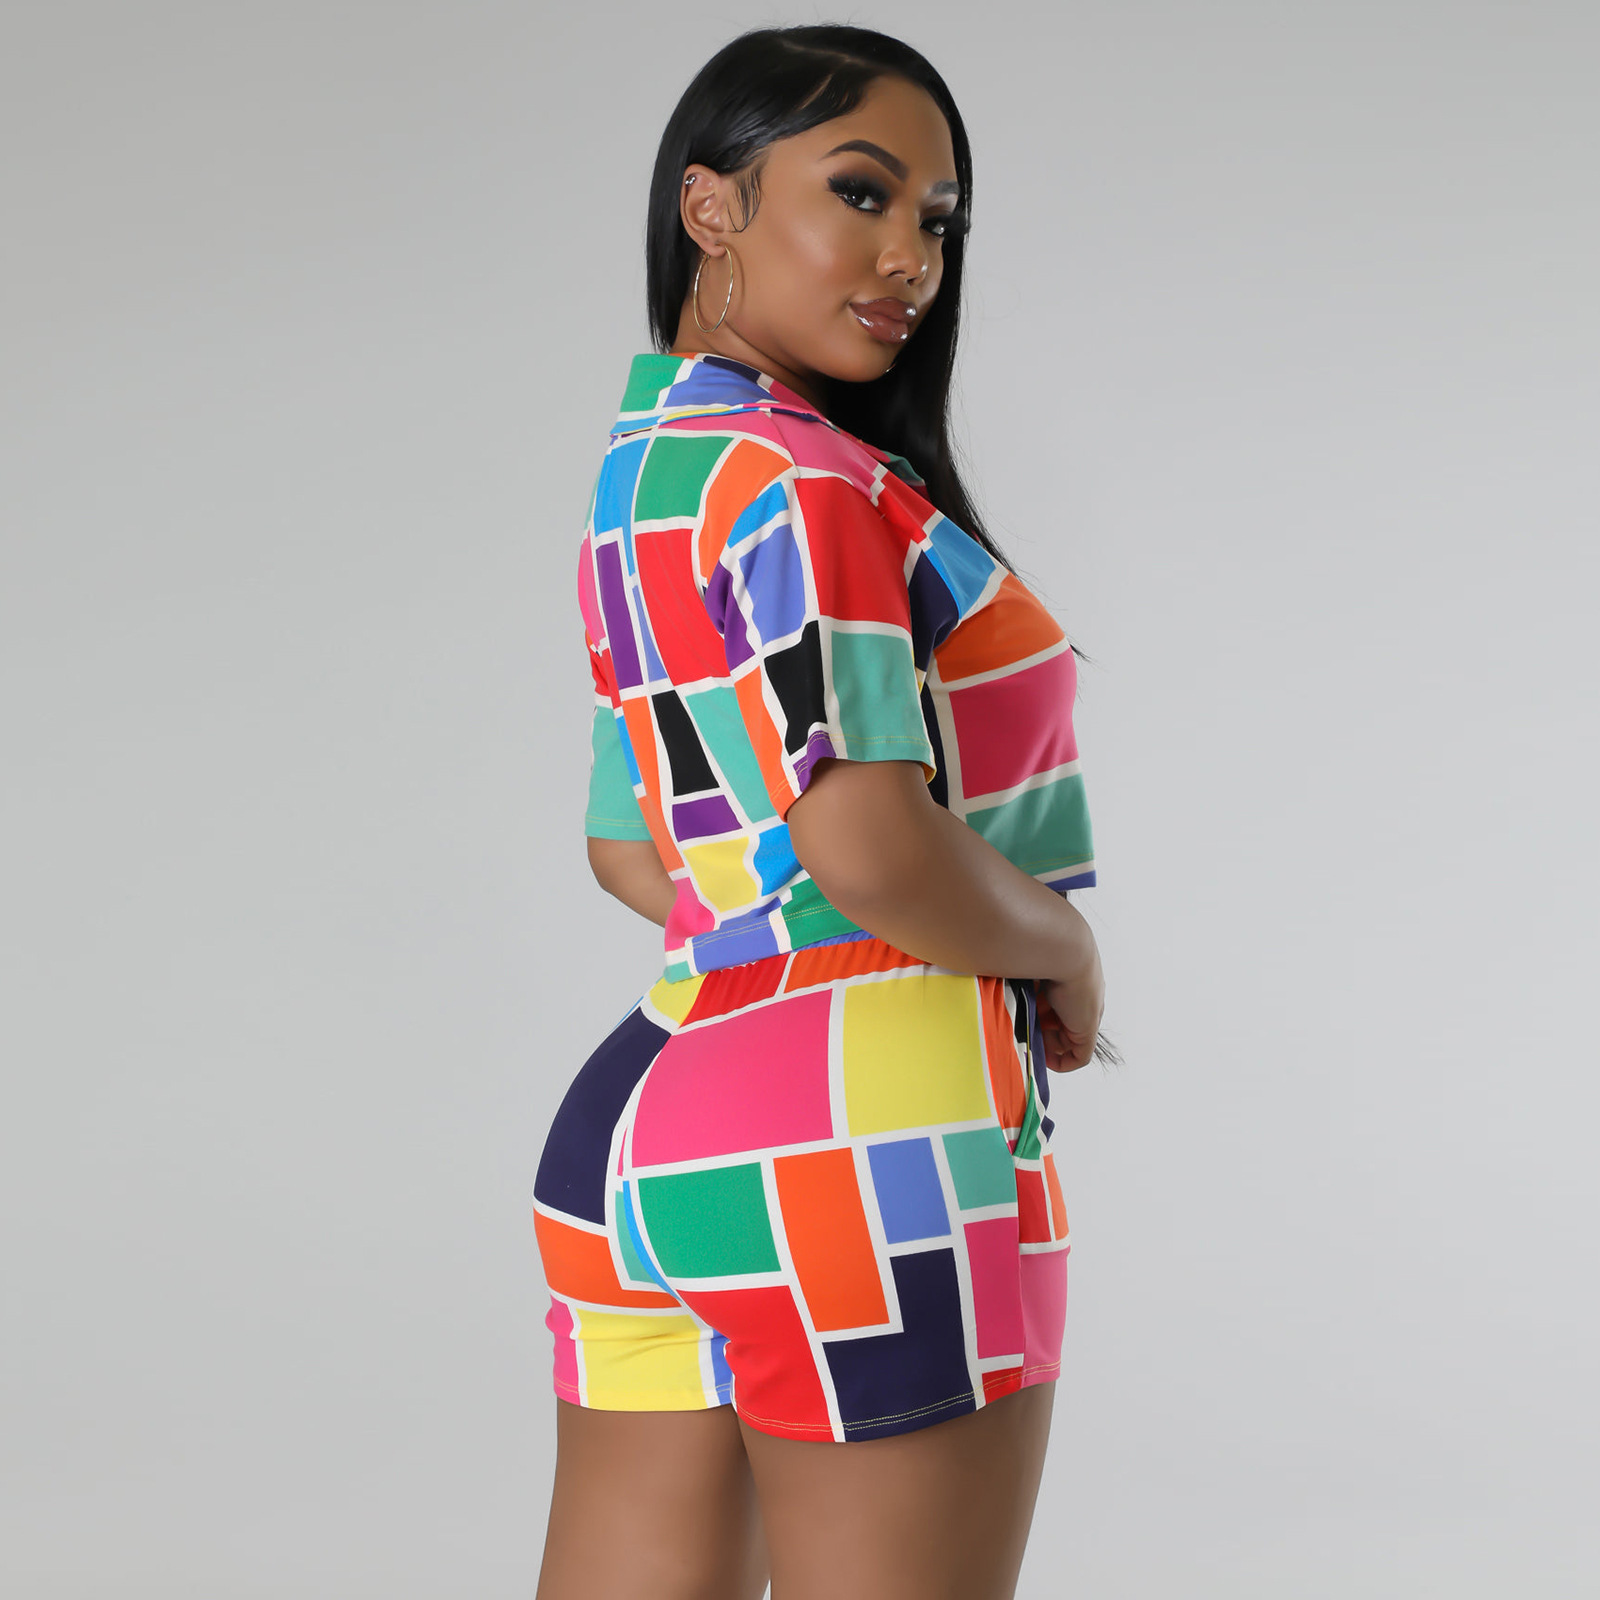 Plus Size Women fashion Casual sports Letter printing top and shorts two  piece set - The Little Connection